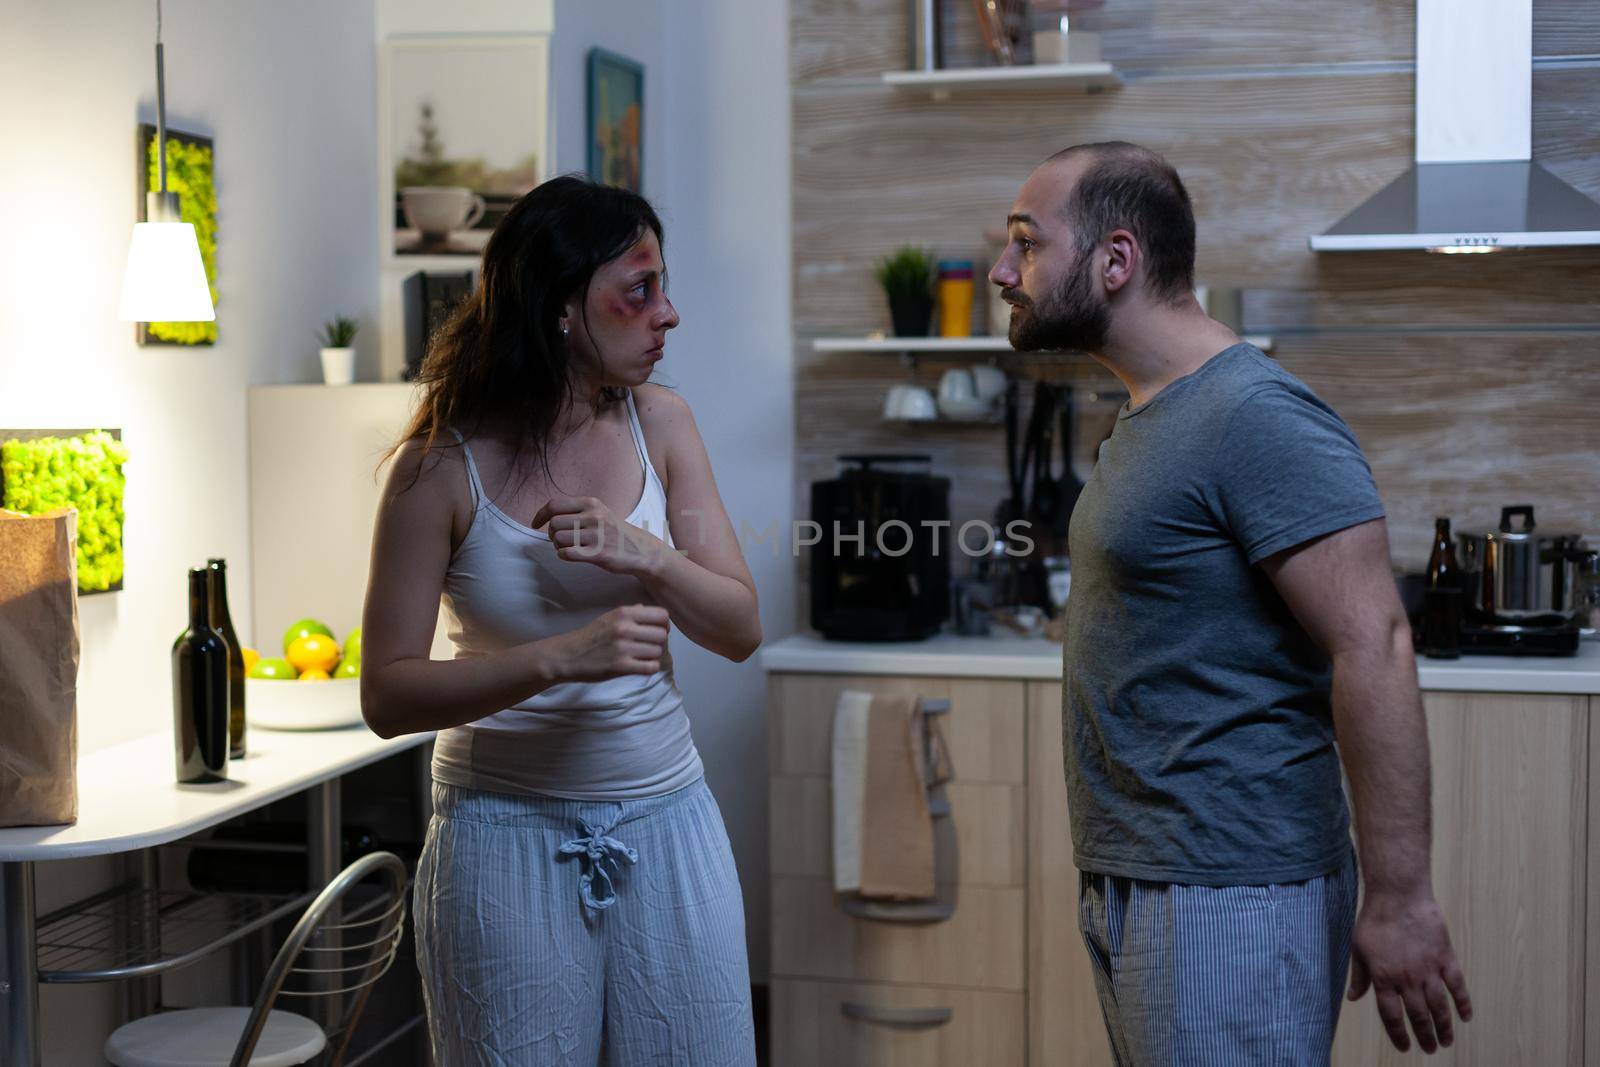 Angry man and woman dealing with domestic conflict while yelling and arguing. Wife with bruises on face and furious violent husband fighting and shouting. Physical violence and aggression